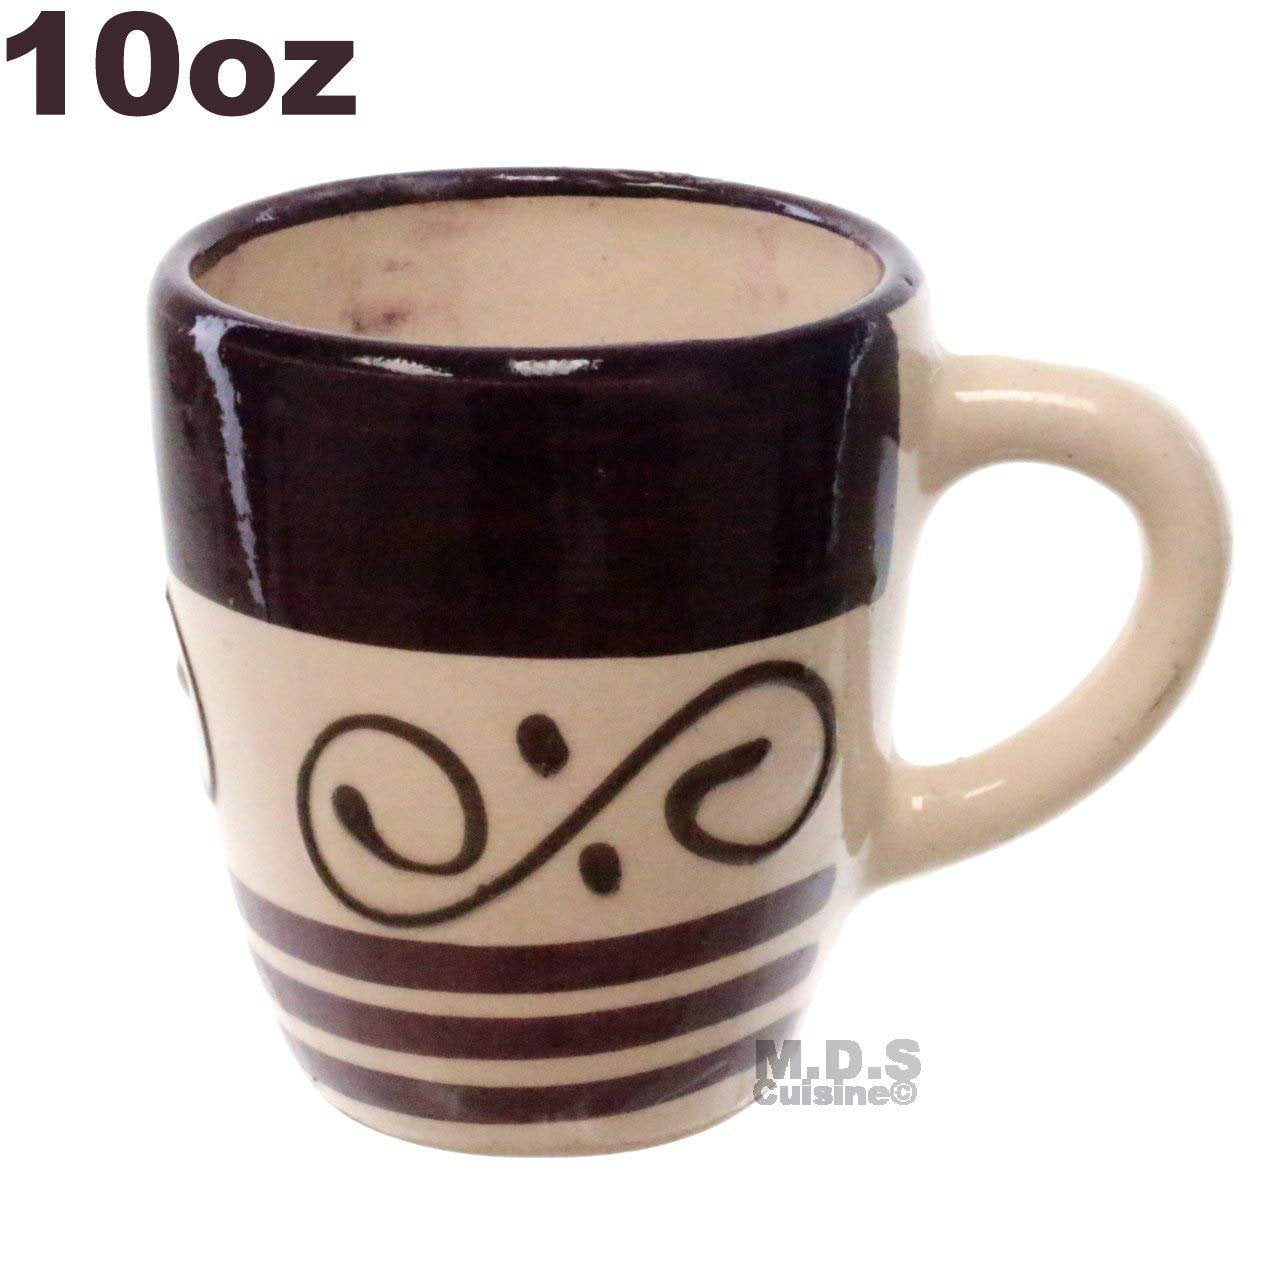 Handmade Clay Cup for Coffee Tea Ceramic Cup Pottery Handcrafted Cappuccino Mug